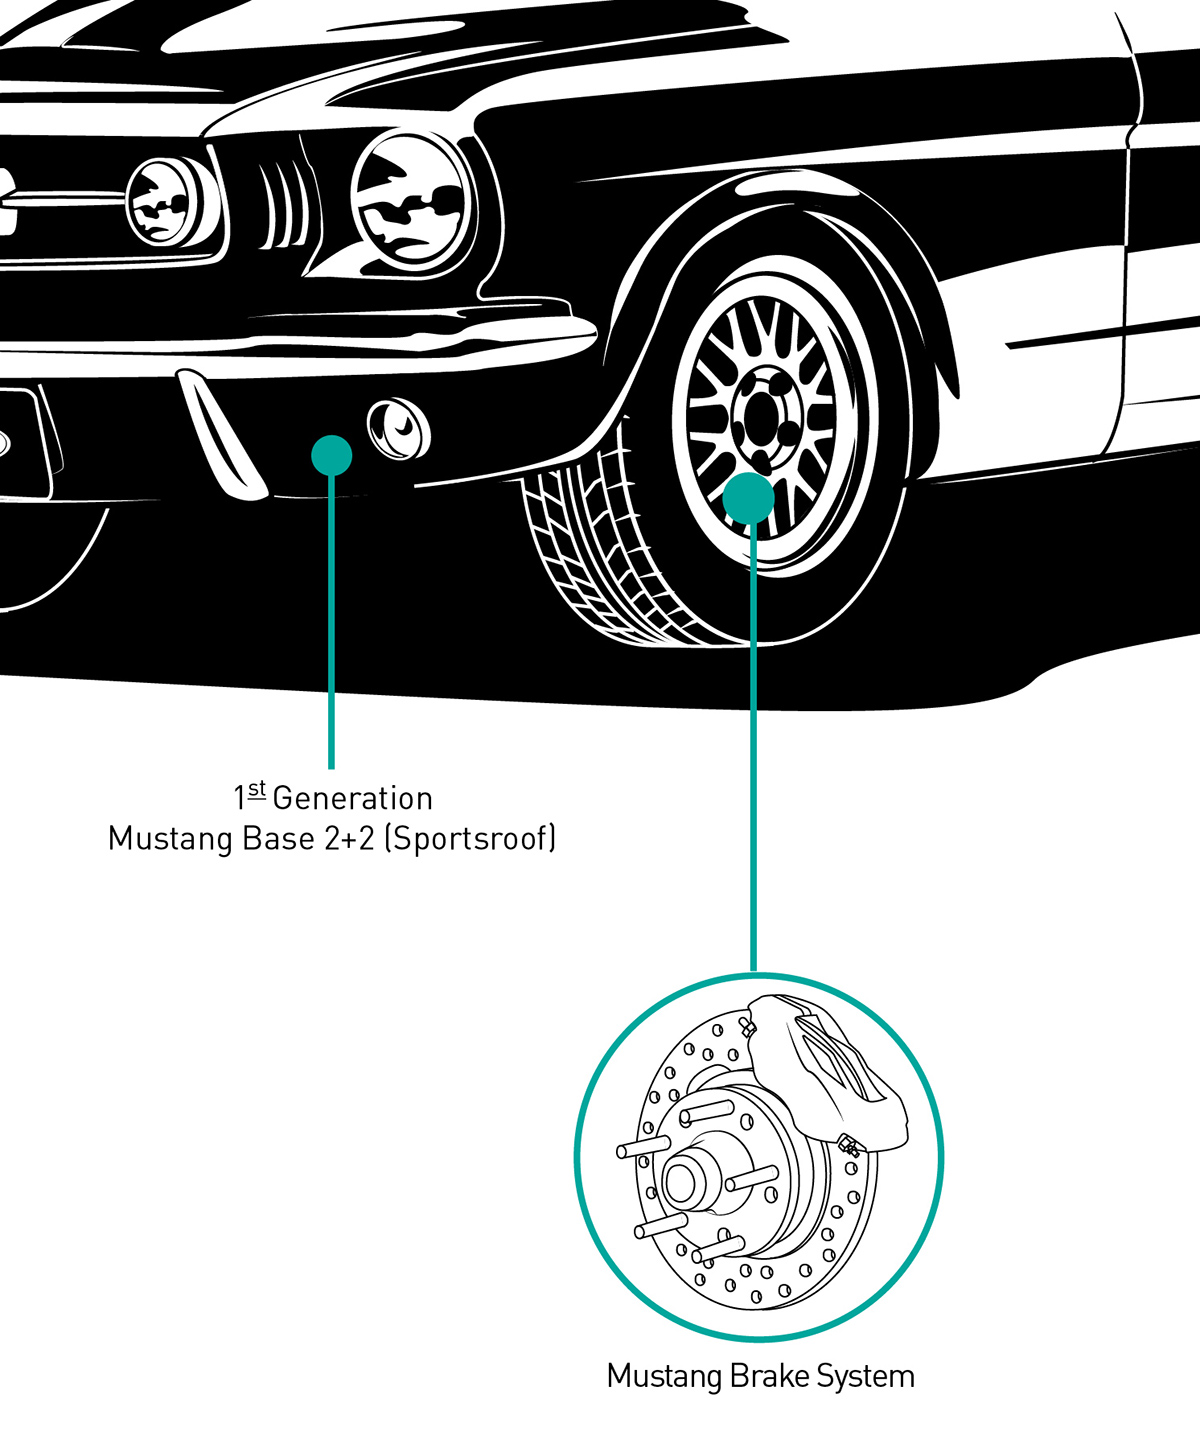 vector infographic Ford Mustang Ford Mustang black in white vector design car information IPCA